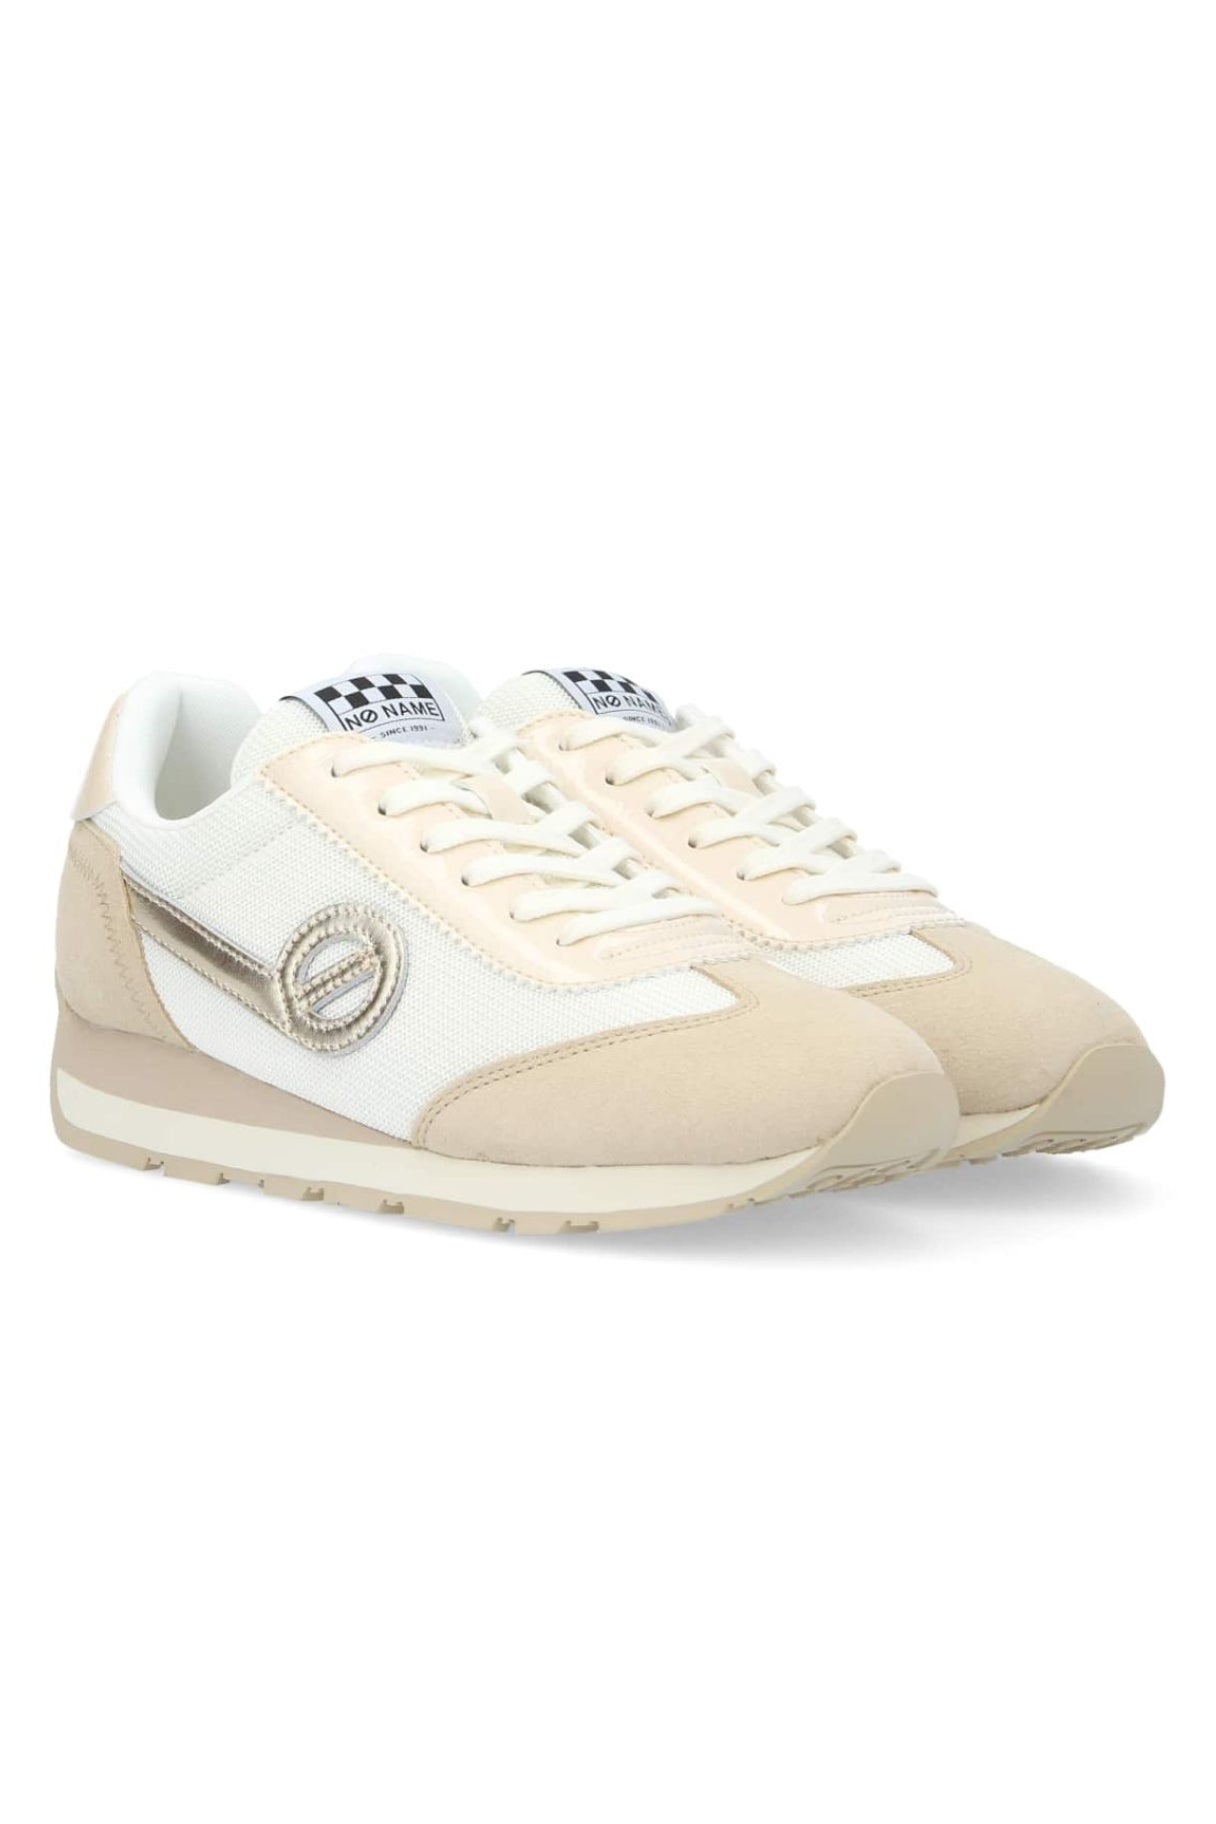 Sneakers City Run Jogger W - Sable/Dove : Style Rétro-Chic